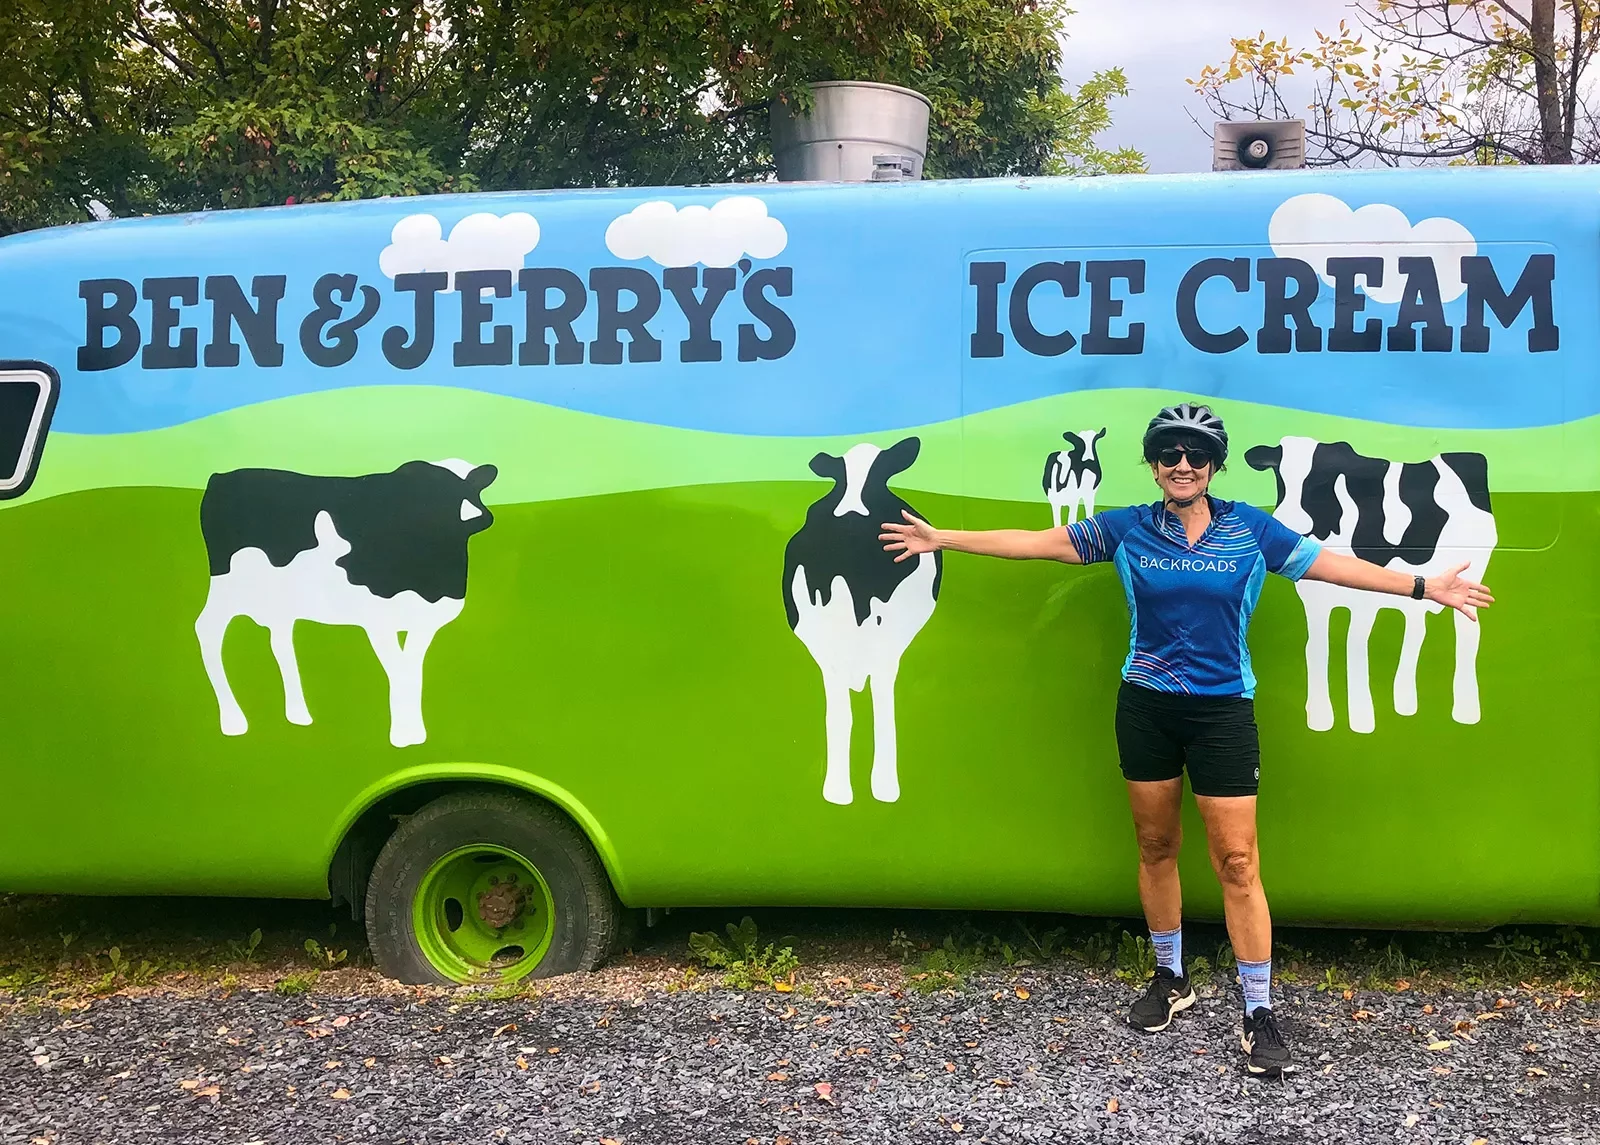 Guest posing in front of Ben &amp; Jerry's car.